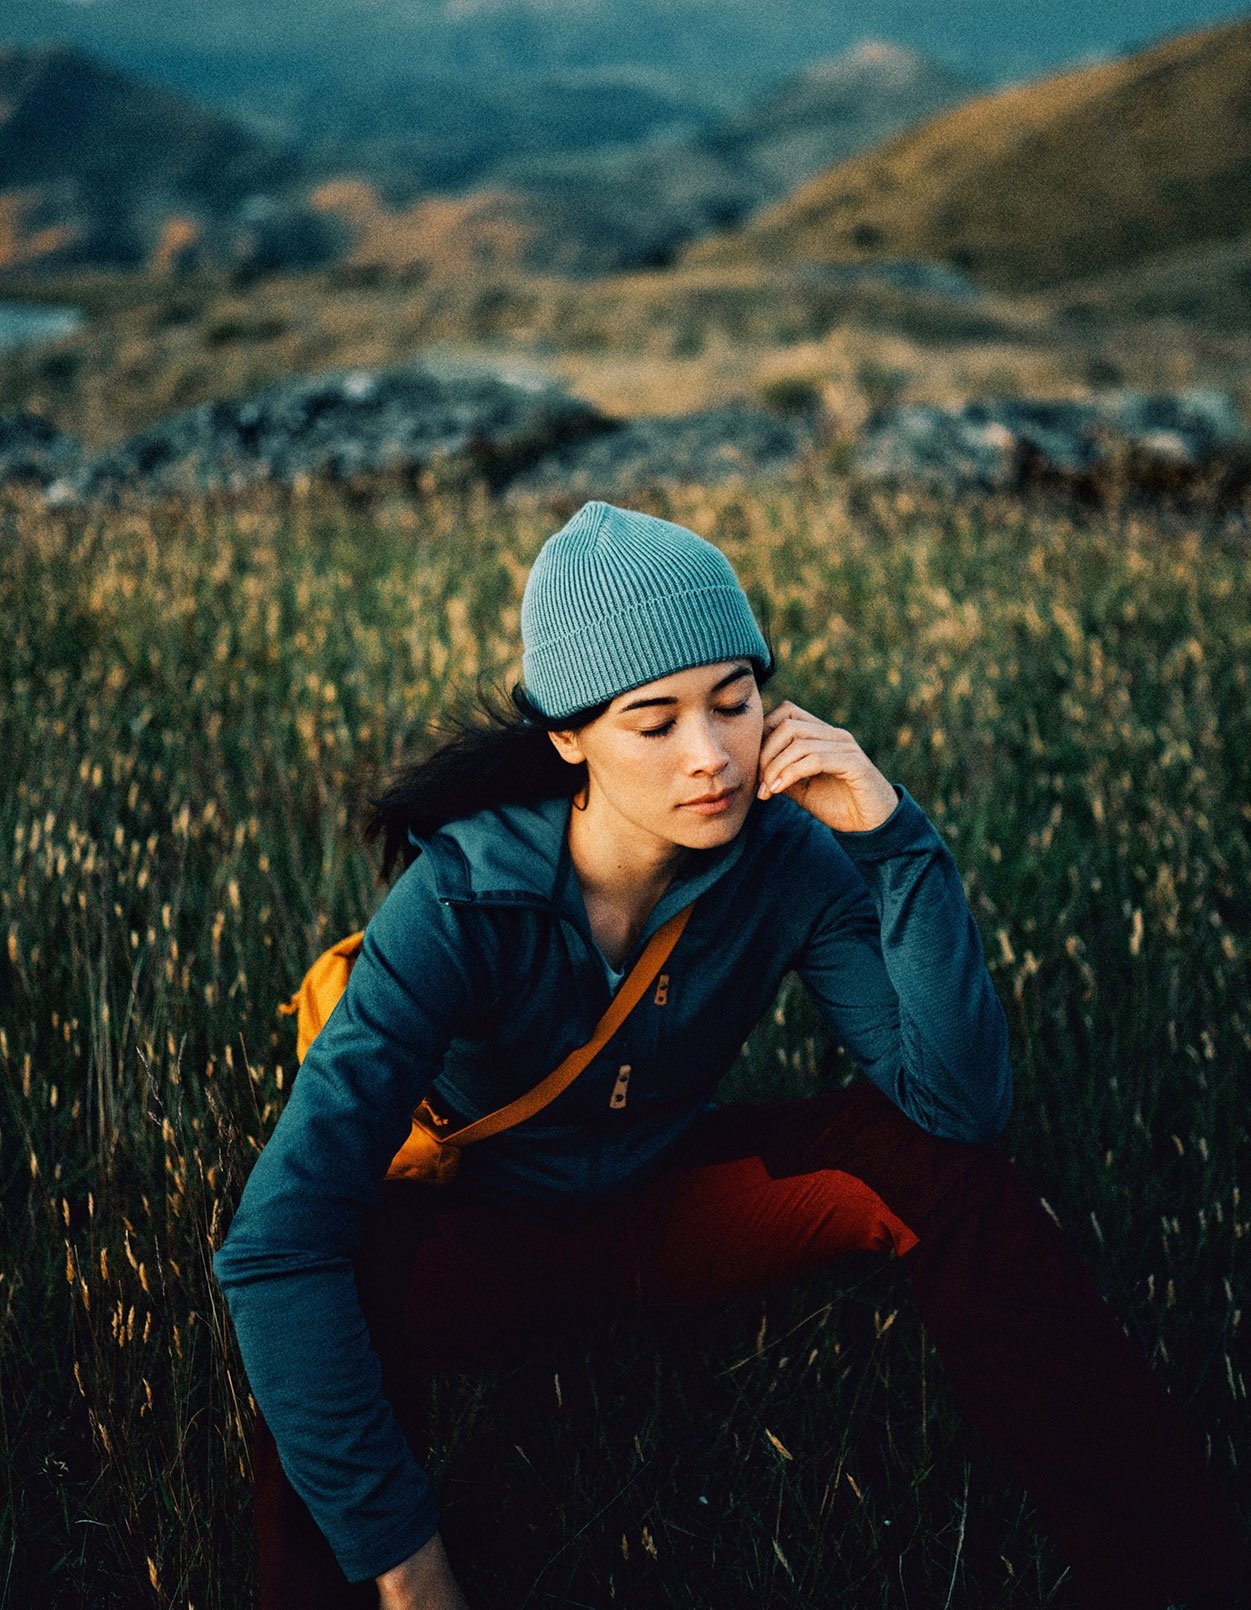 woman with beanie on standing in field